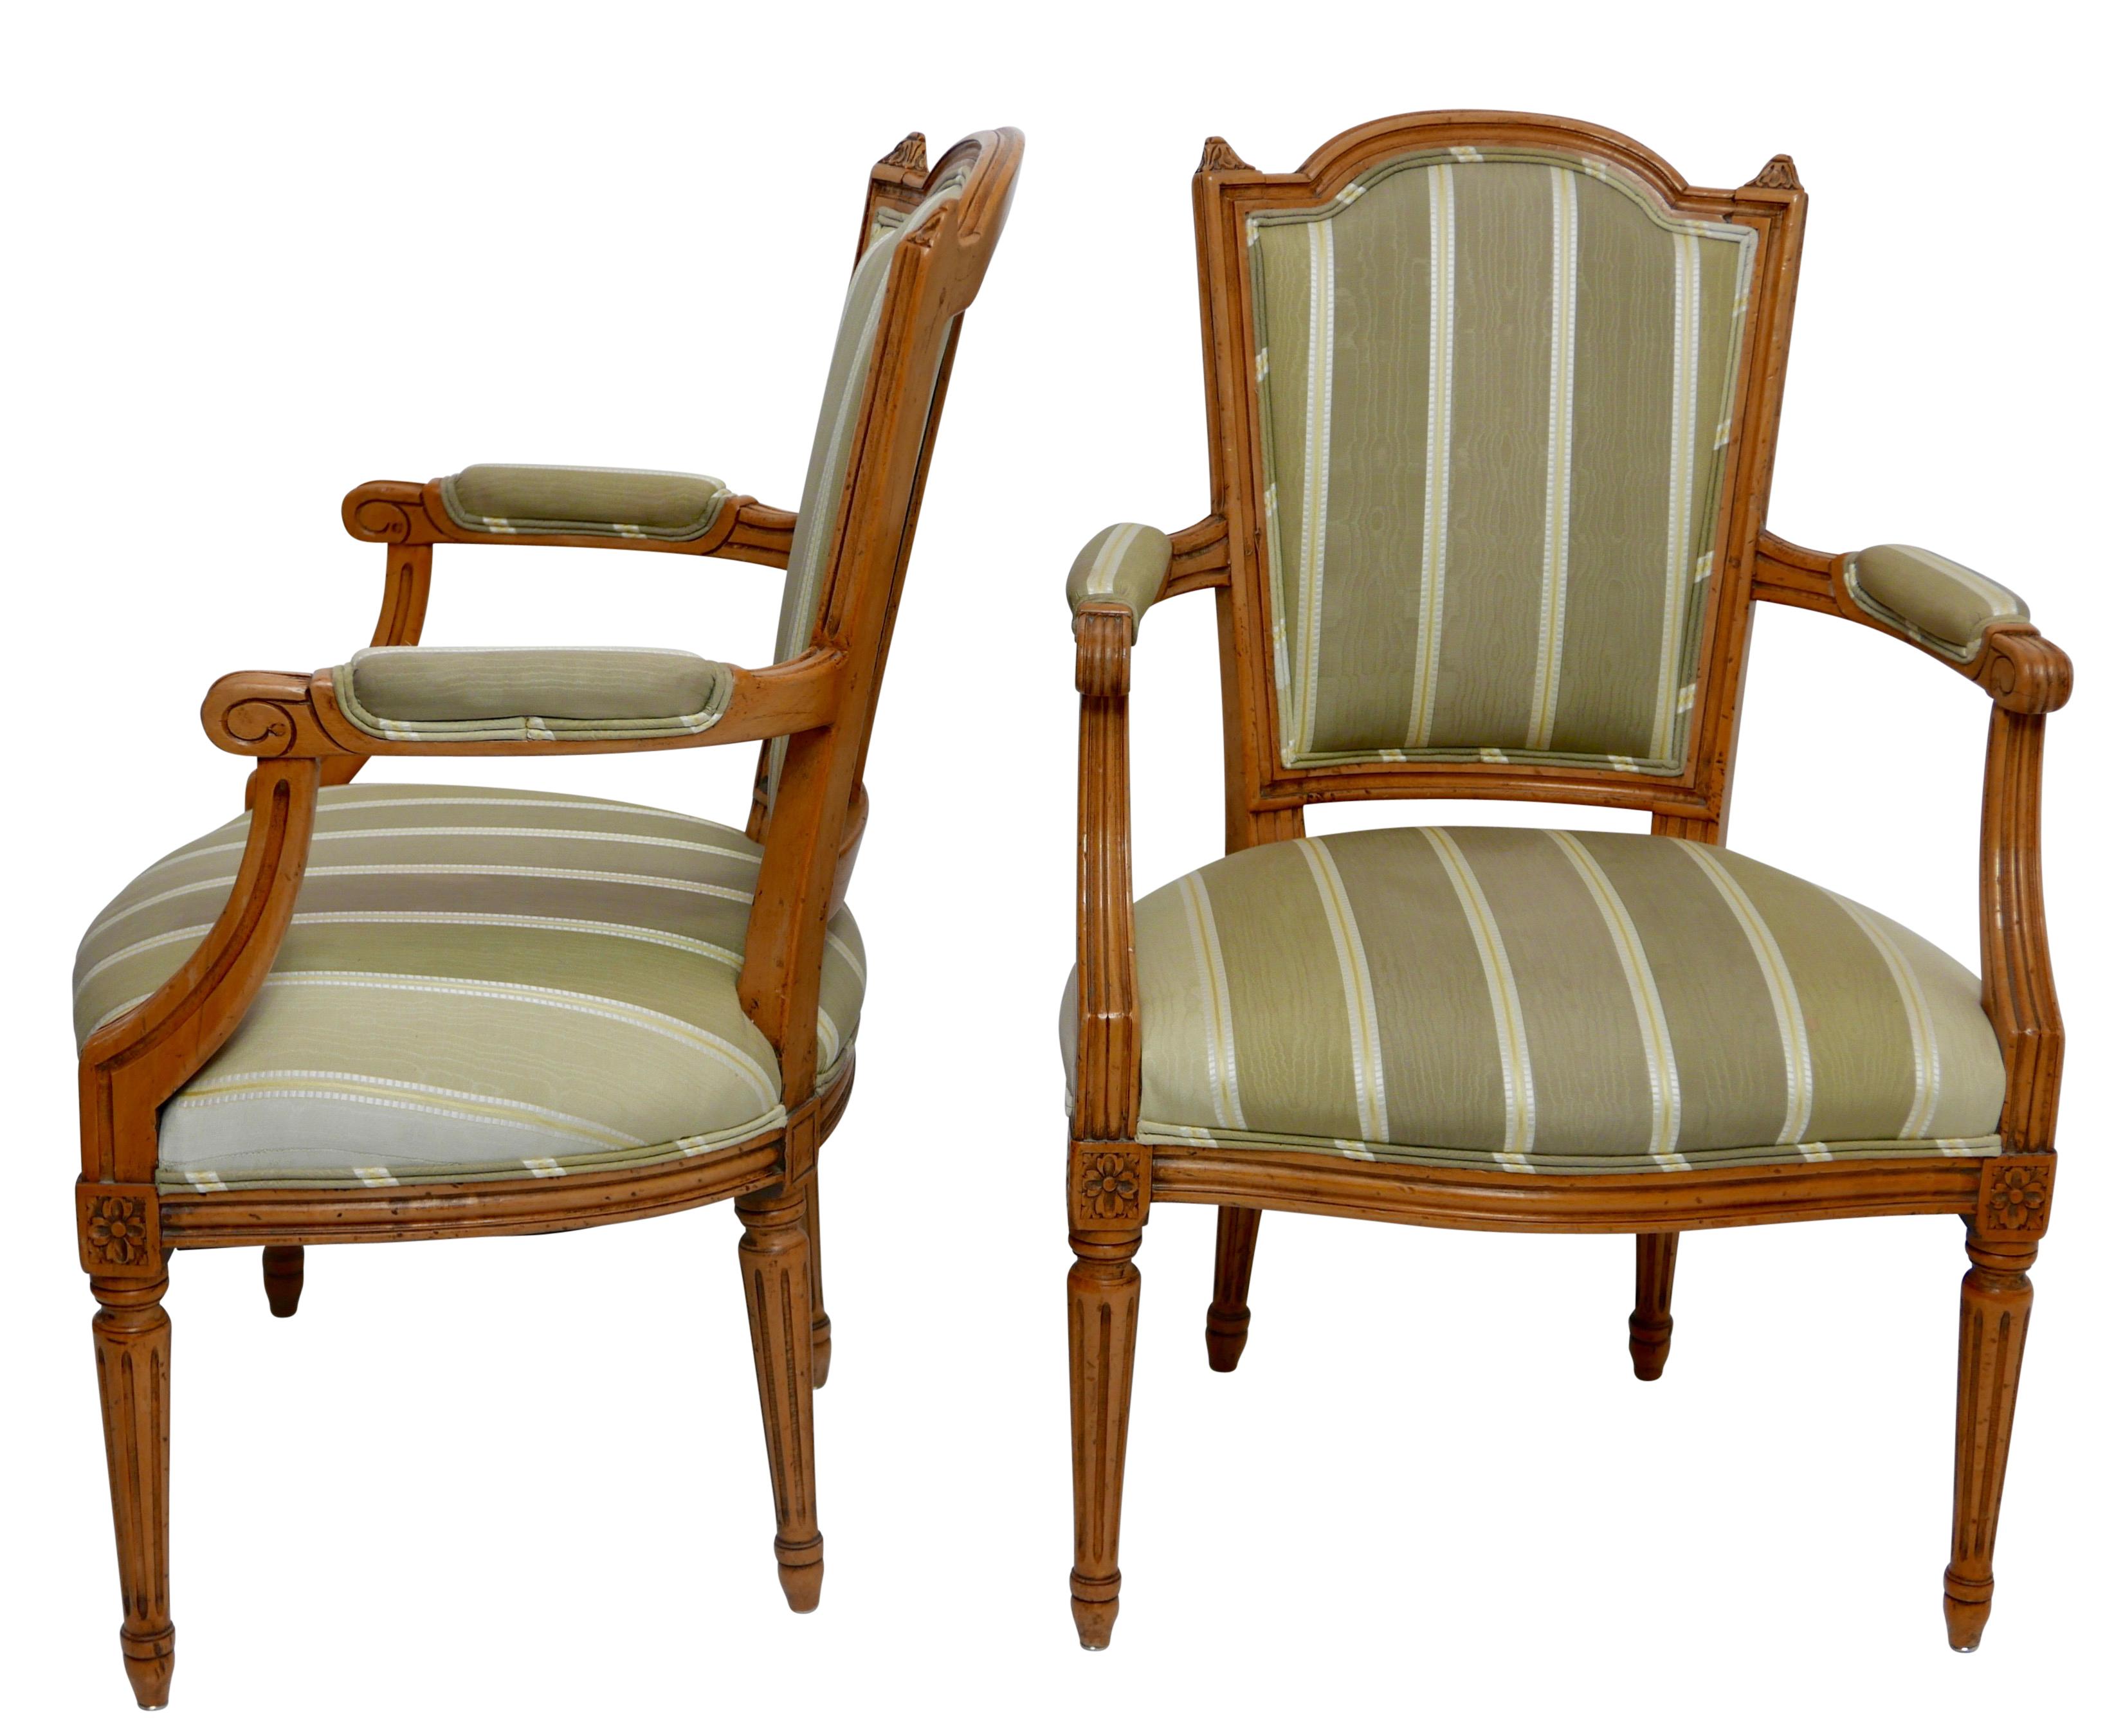 A pair of upholstered fruitwood Fauteuils armchairs with beautifully carved frames.
France, late 18th-early 19th century.
Recently refinished.